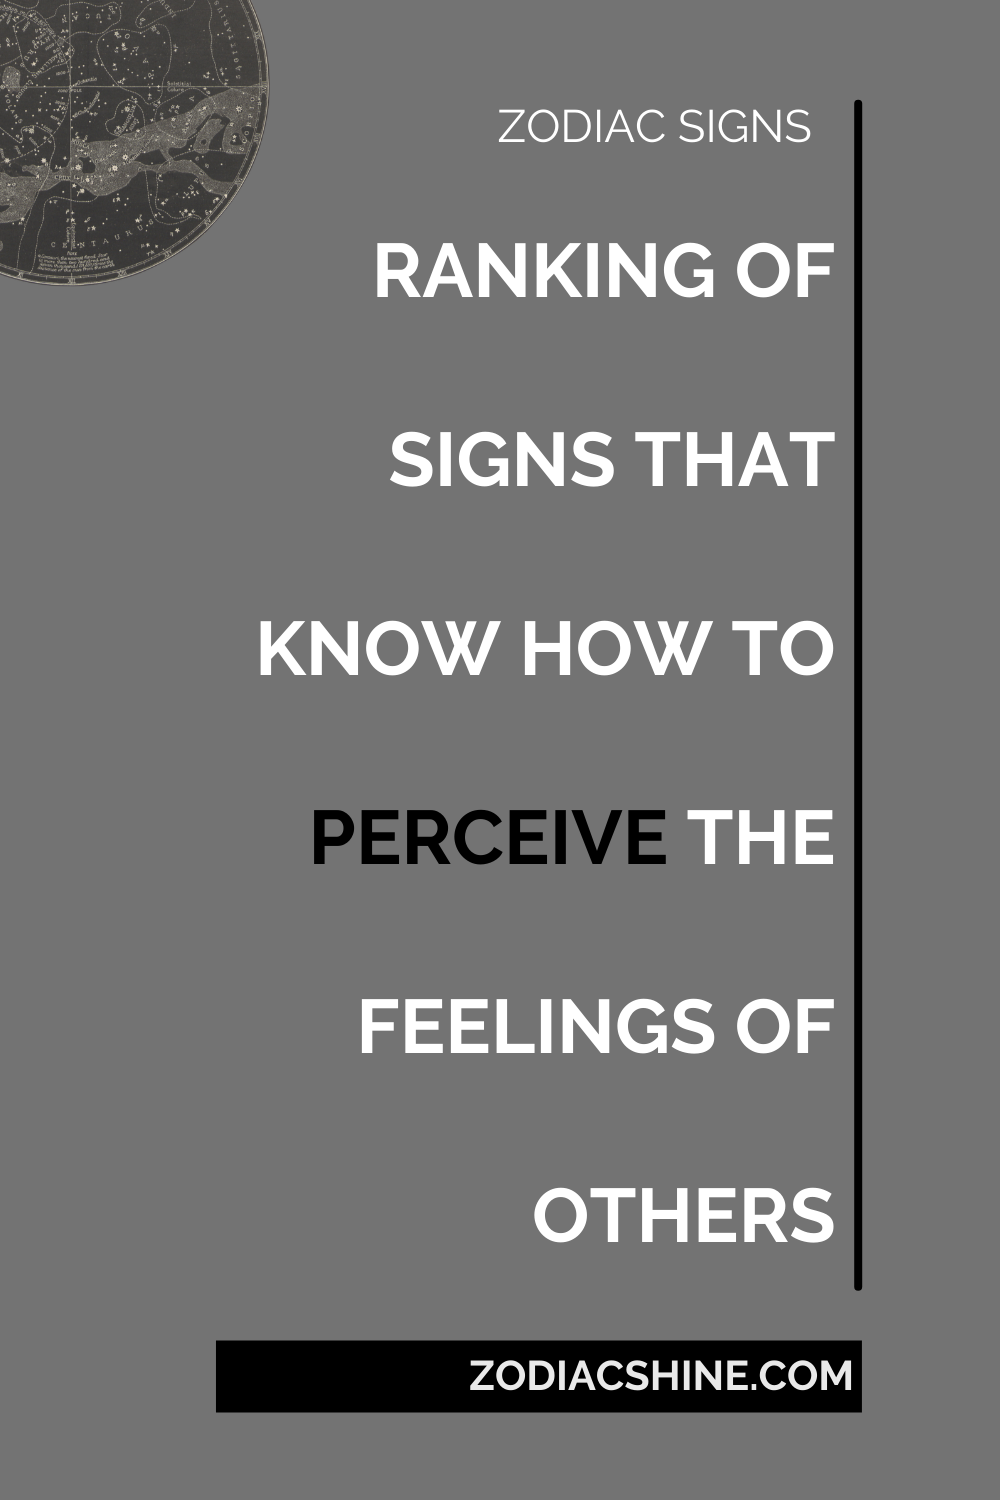 RANKING OF SIGNS THAT KNOW HOW TO PERCEIVE THE FEELINGS OF OTHERS